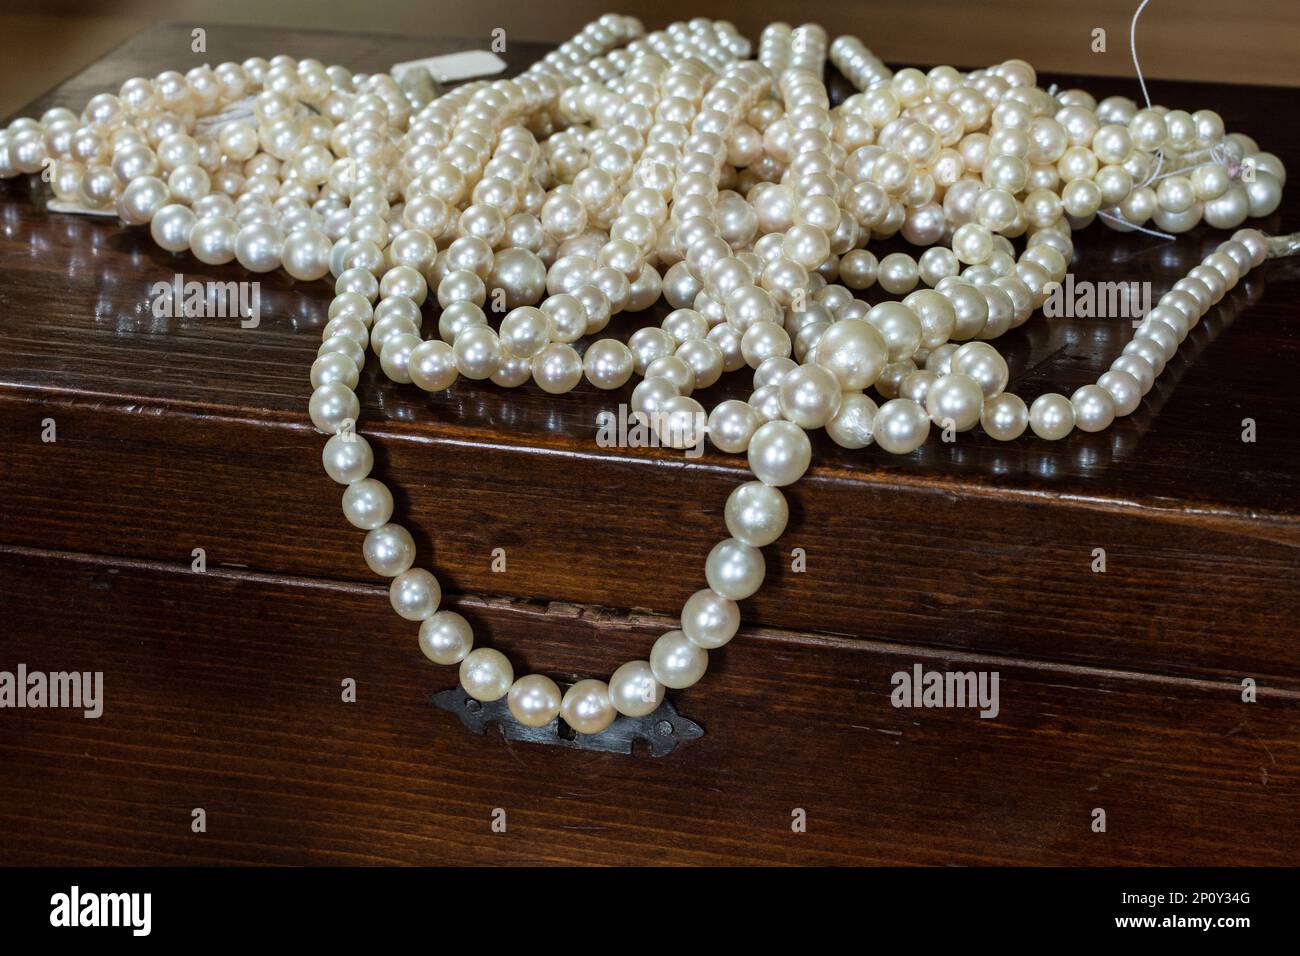 pearl necklaces placed on a box Stock Photo